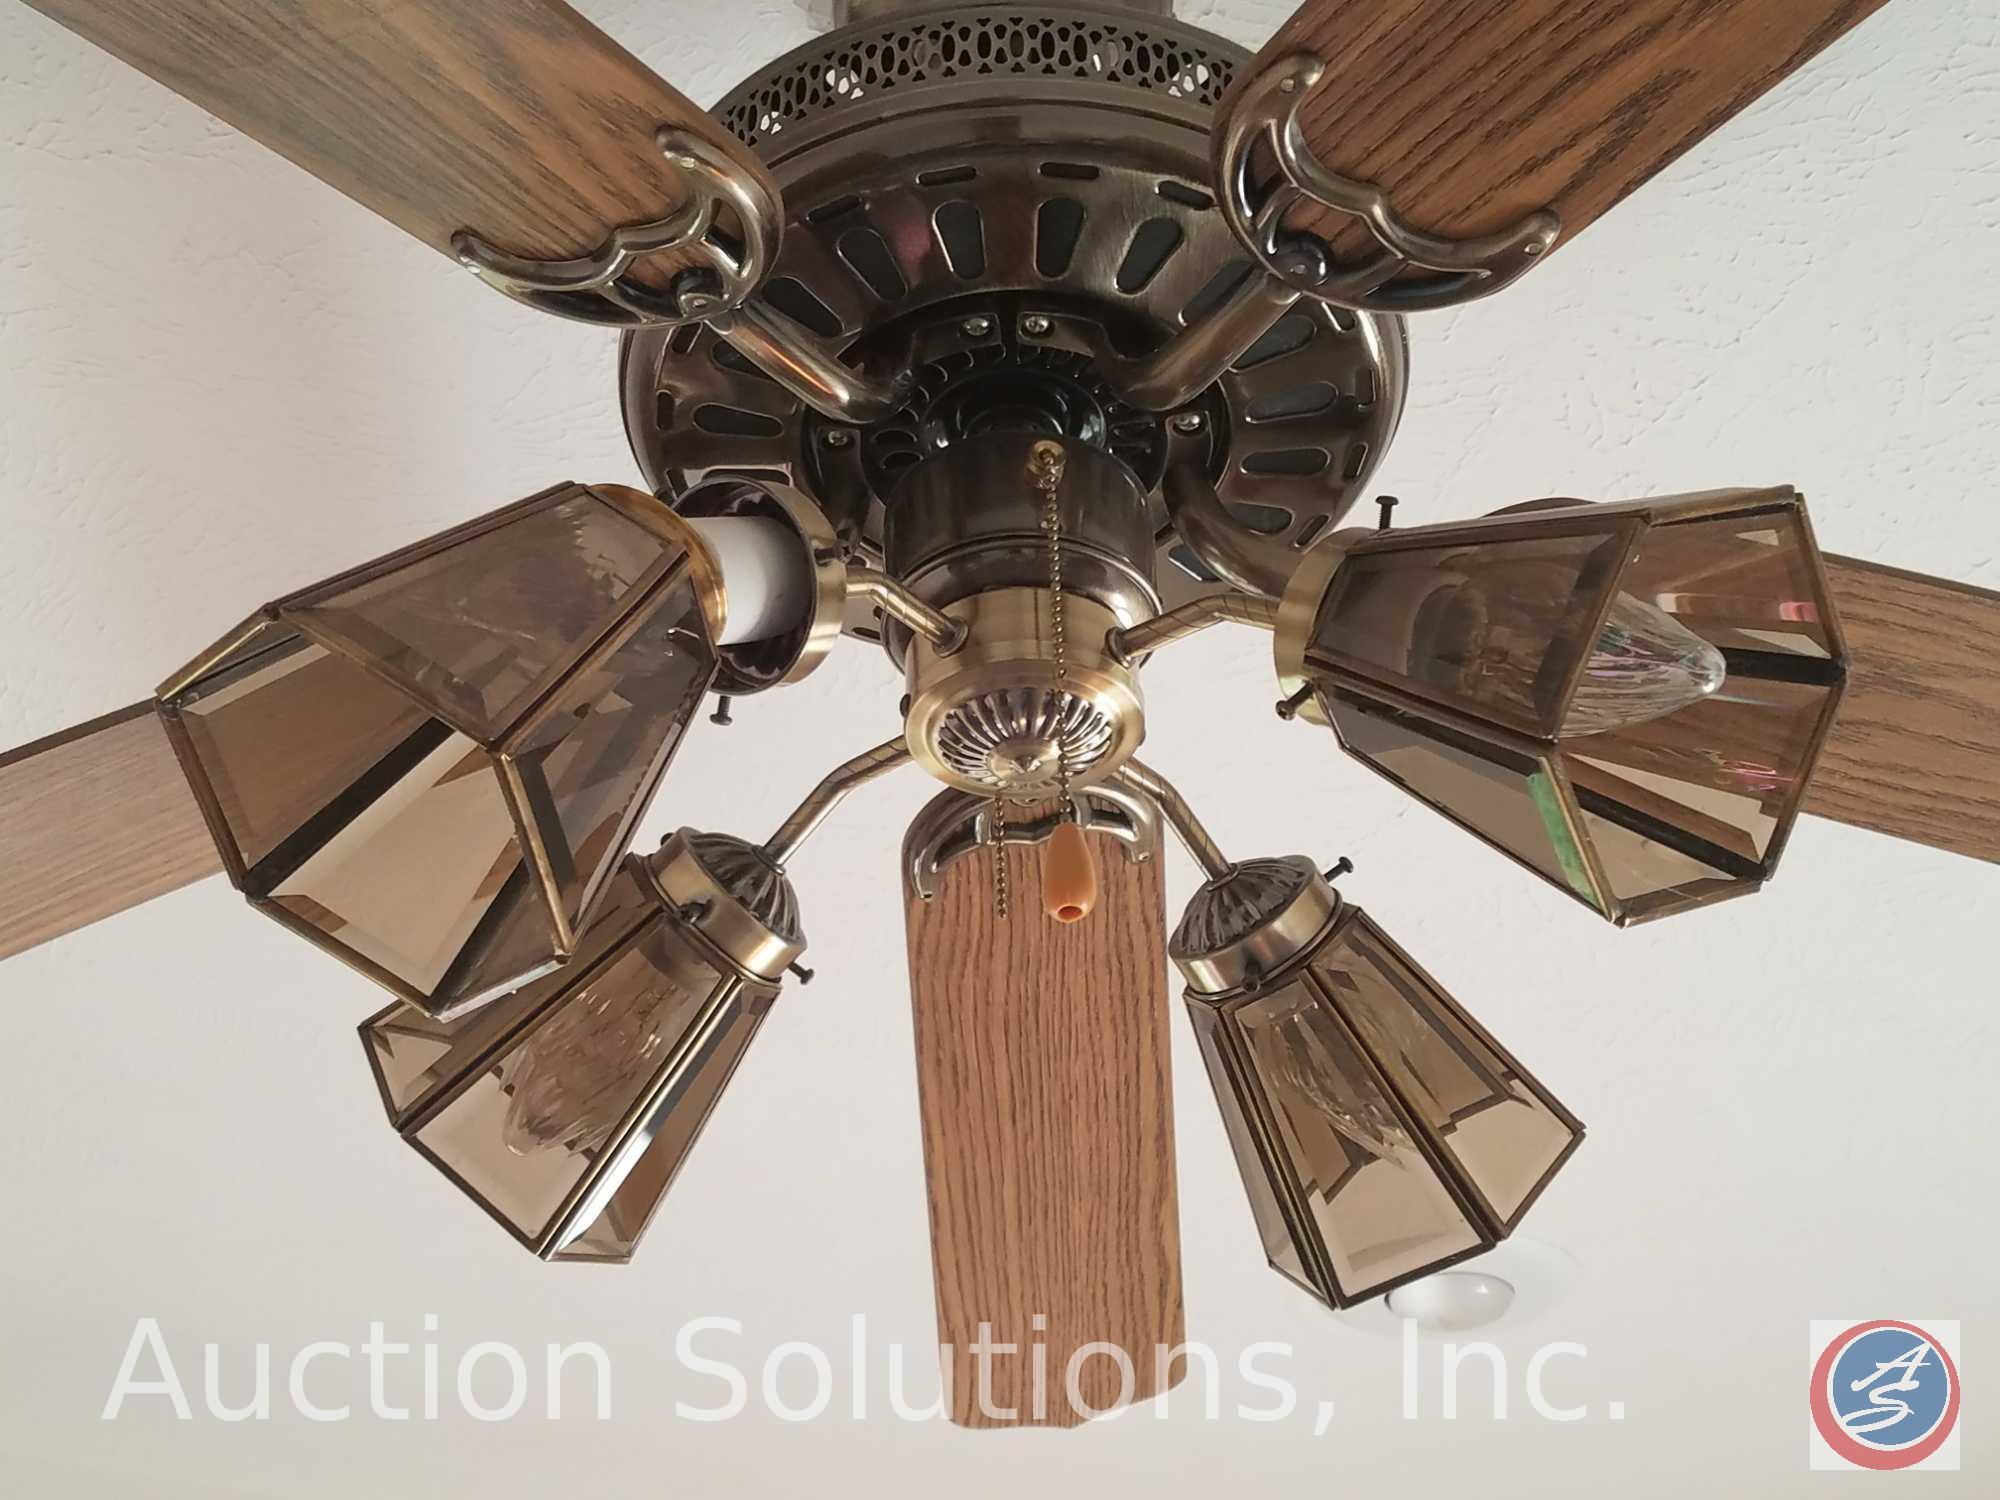 (2) Lighted Ceiling Fans; in Kitchen, and Main Floor Office